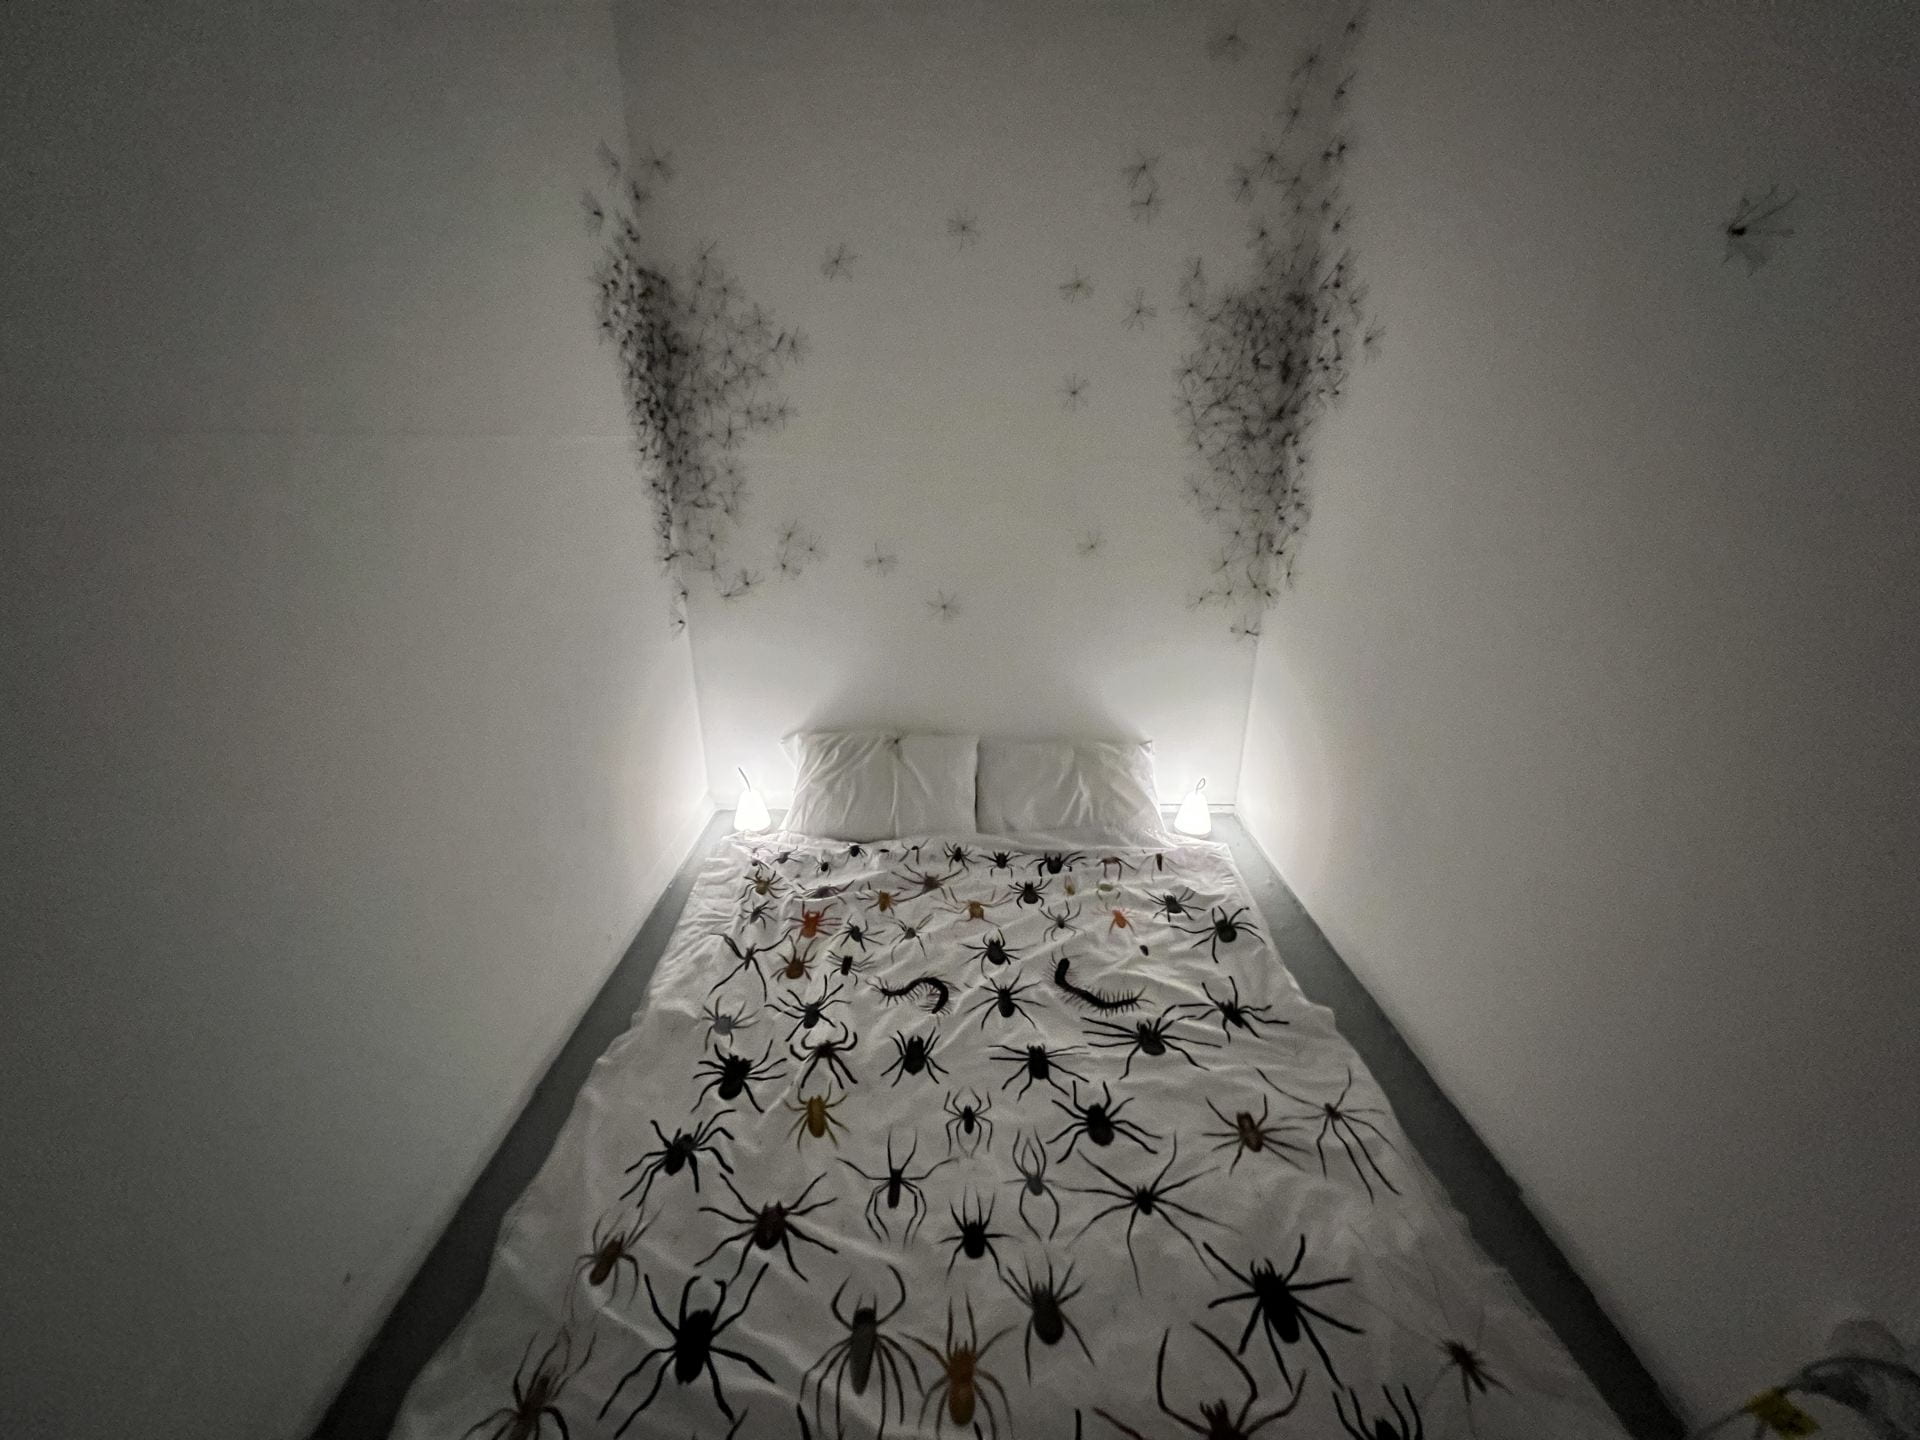 Photograph of installation, bed spread painted with spiders laid down on the floor with pillows and wire spiders climbing the walls.